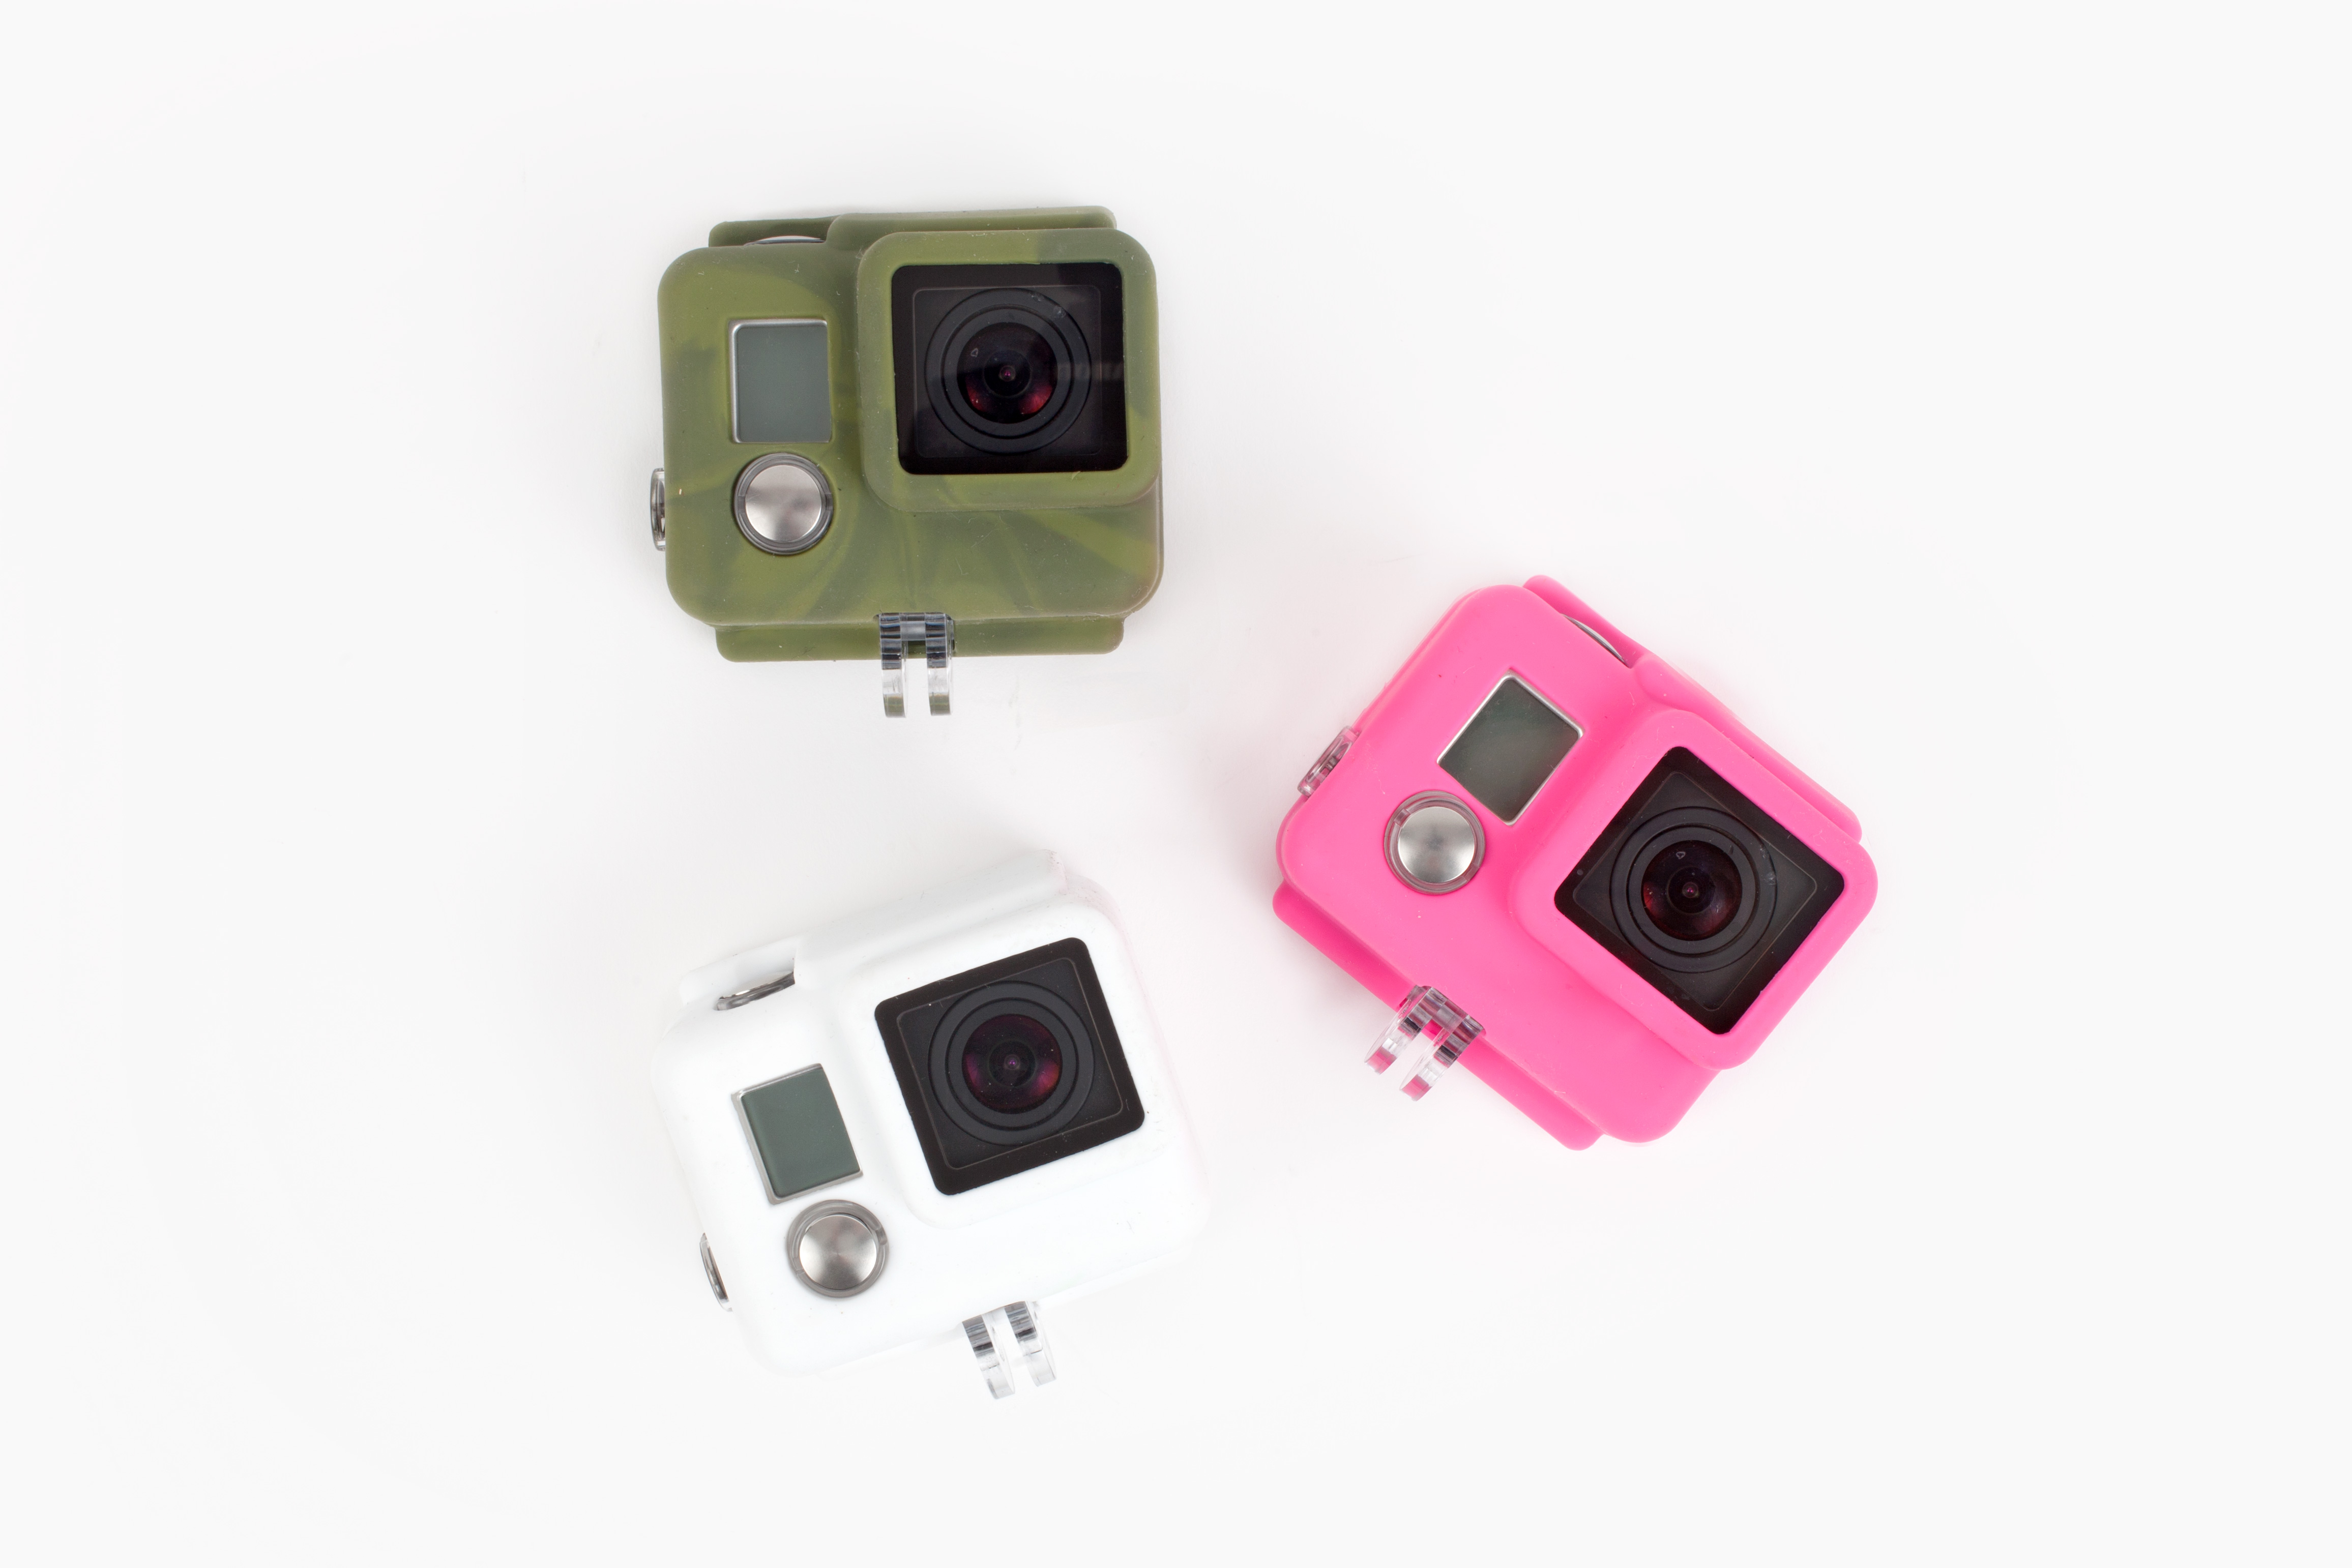 The new silicone GoPro camera cases: Like bubble wrap for your camera.